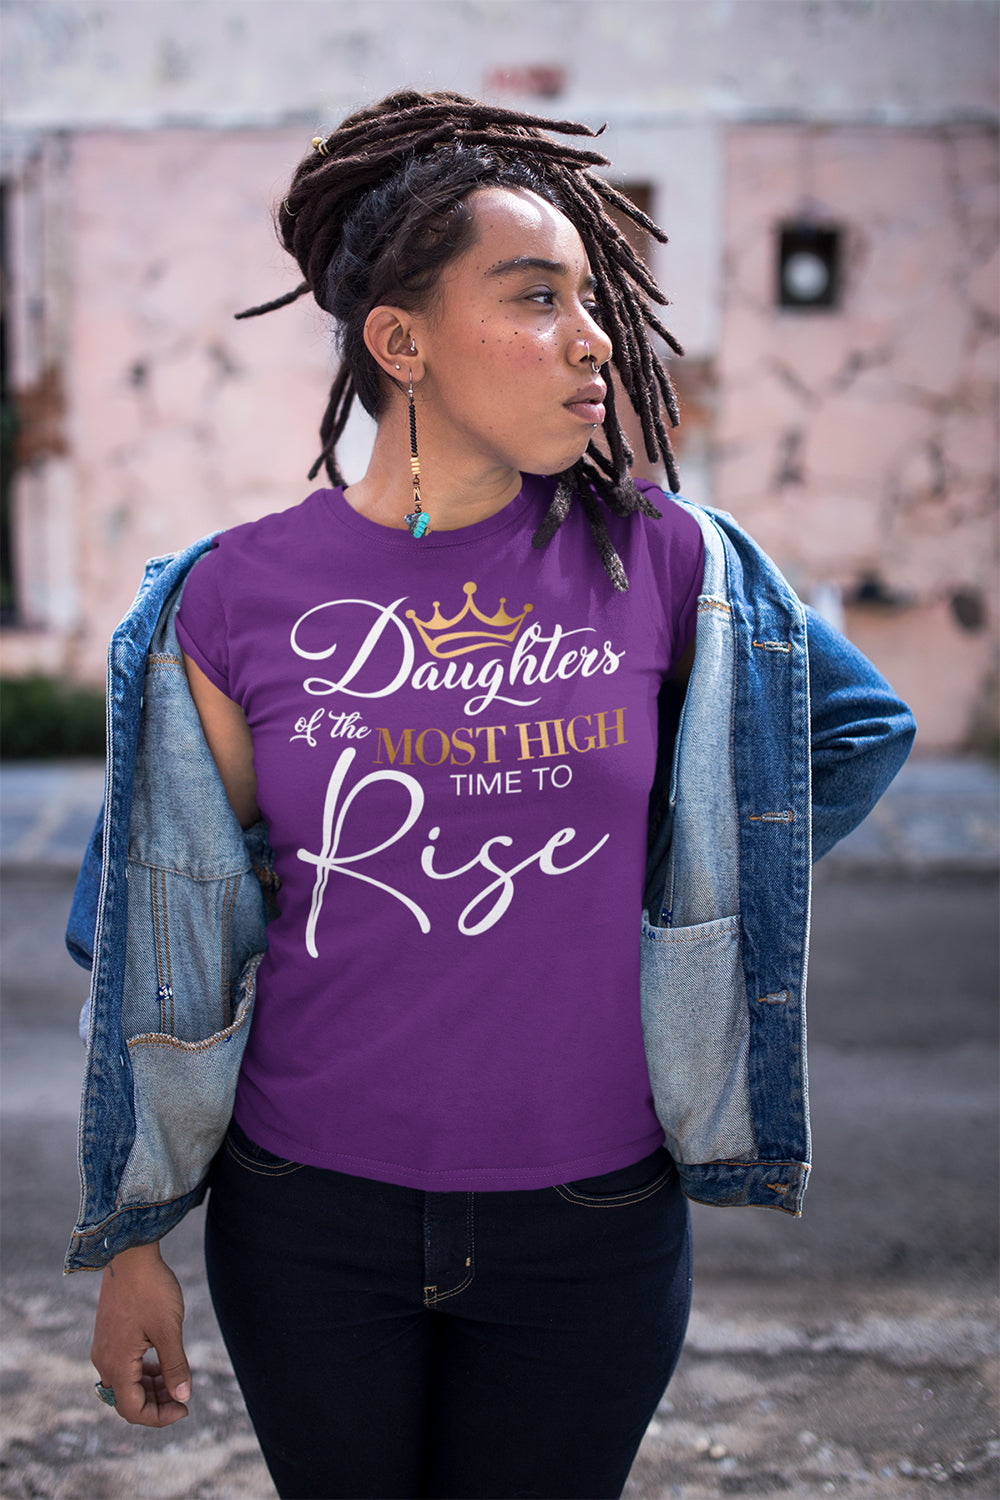 TIME TO RISE | Golden Onyx - Women's Tee